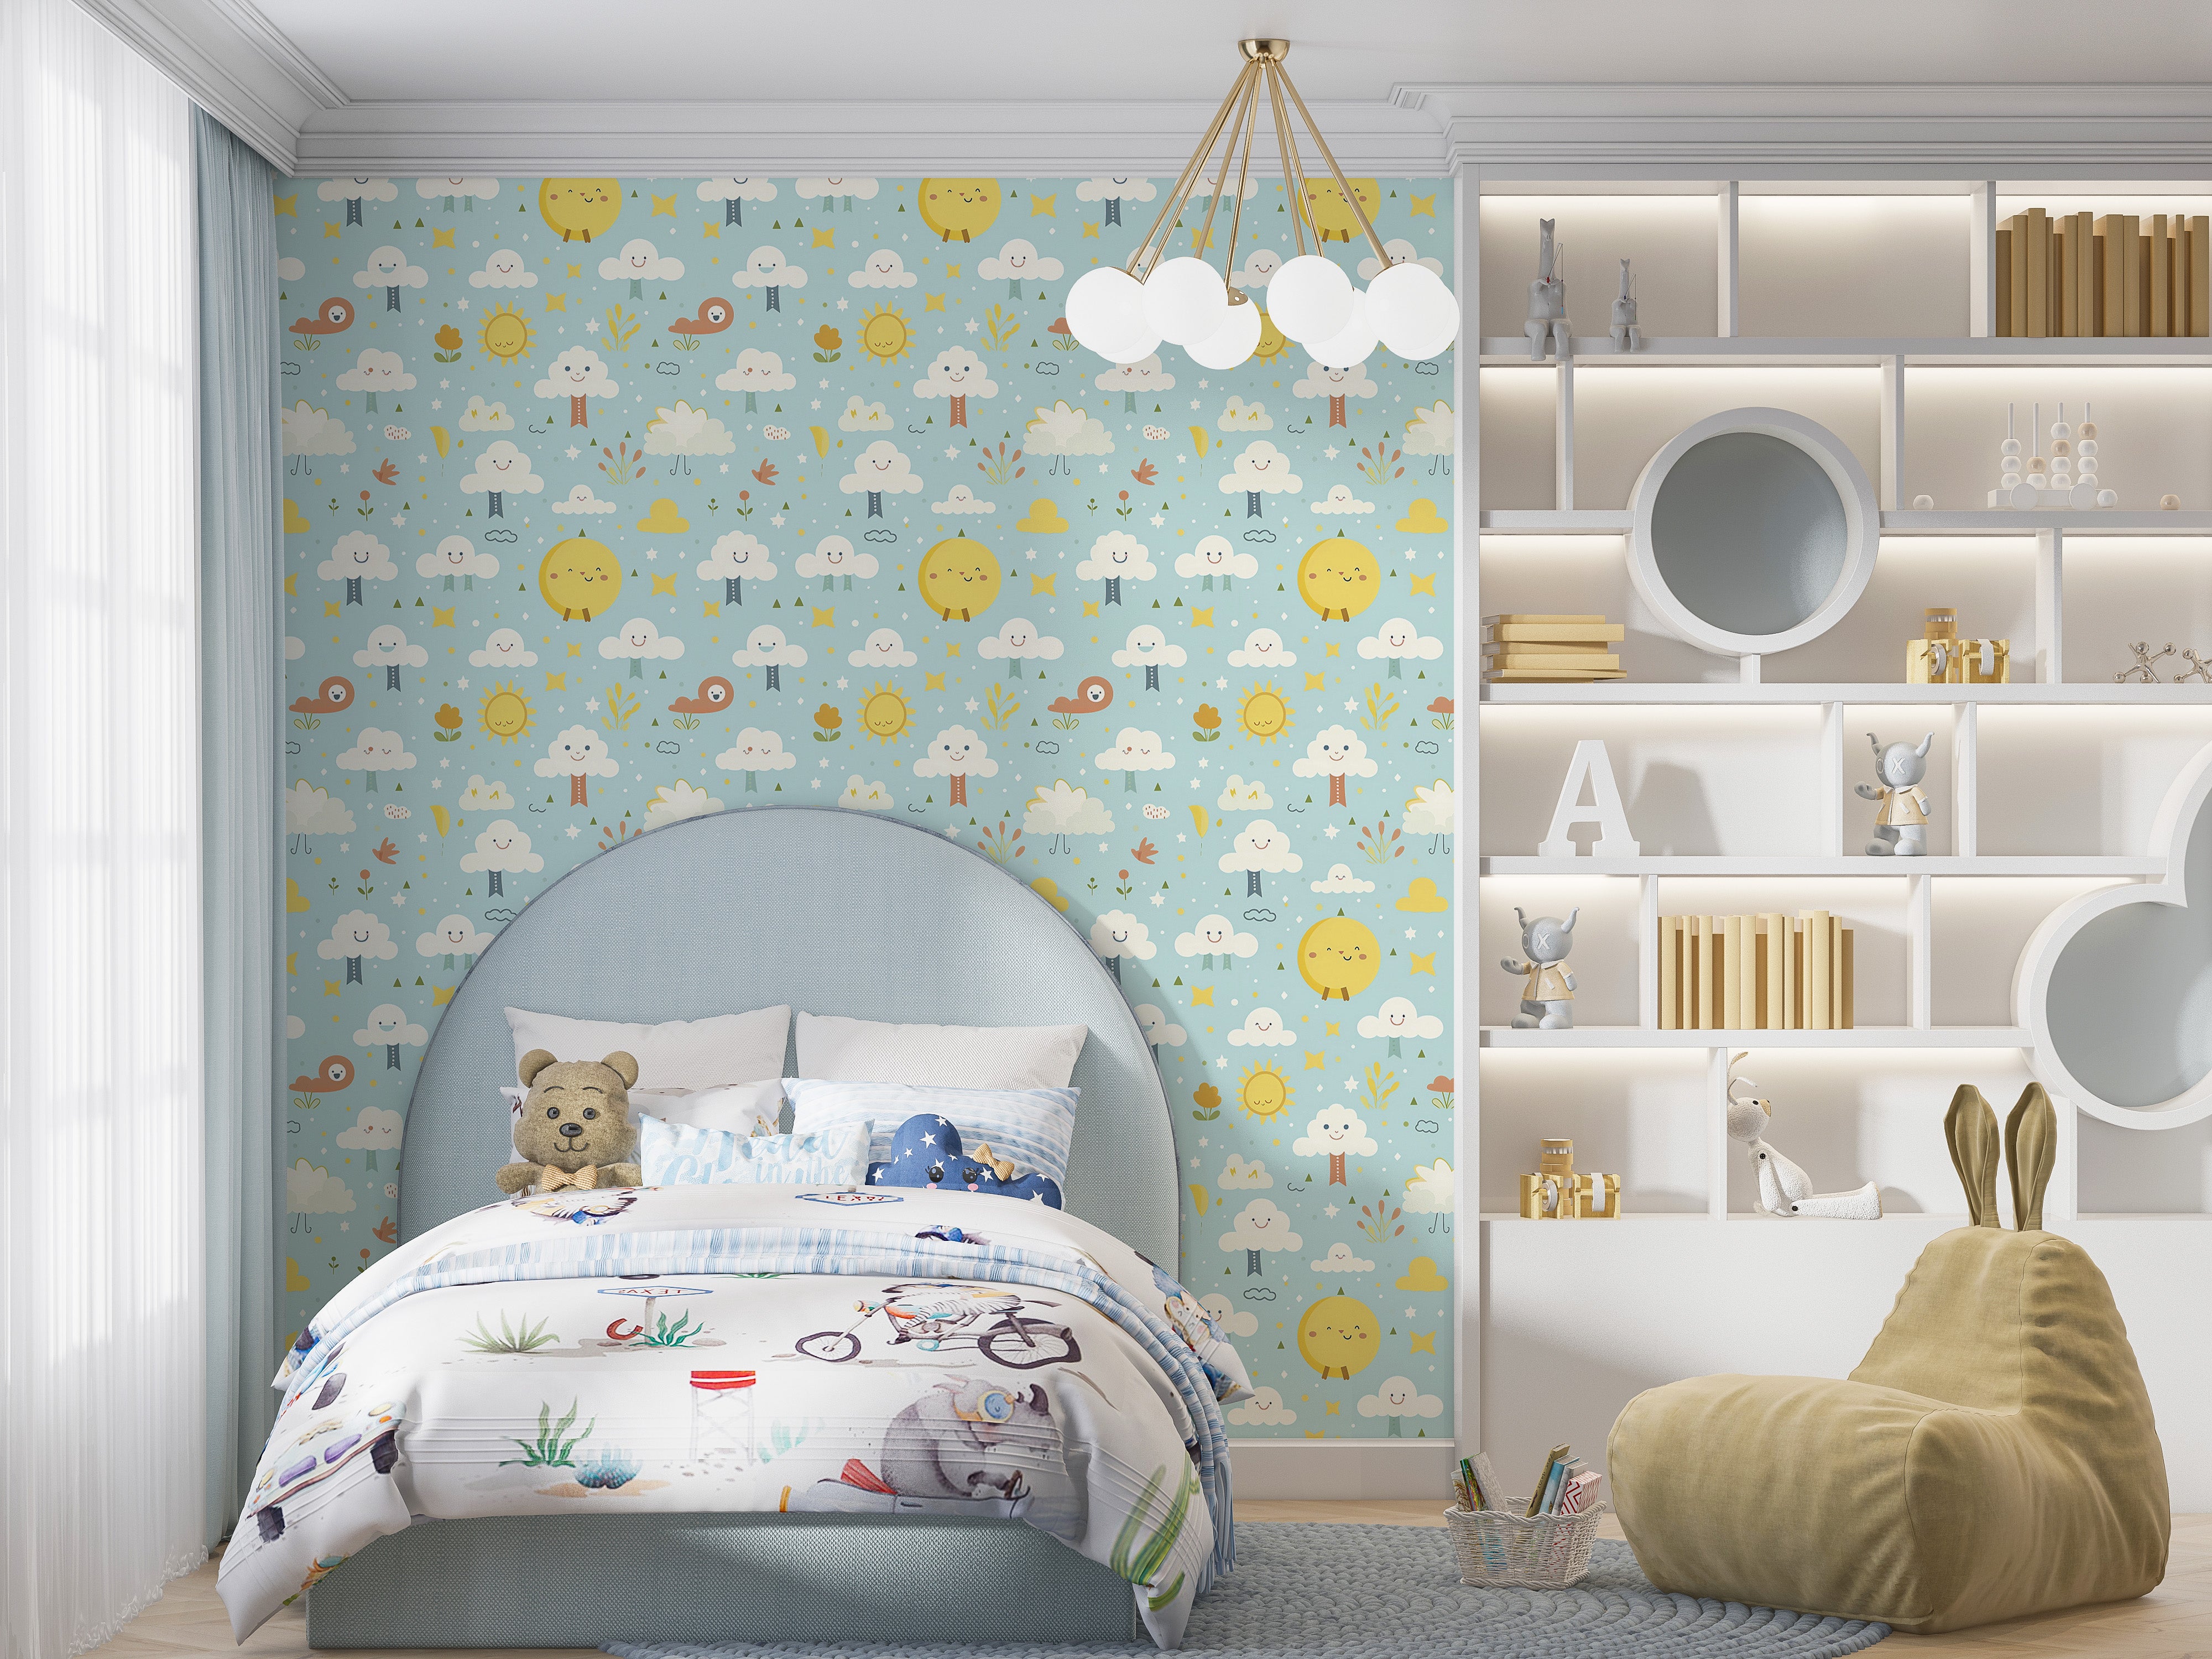 Kids Room Makeover with Friendly Removable Wallpaper